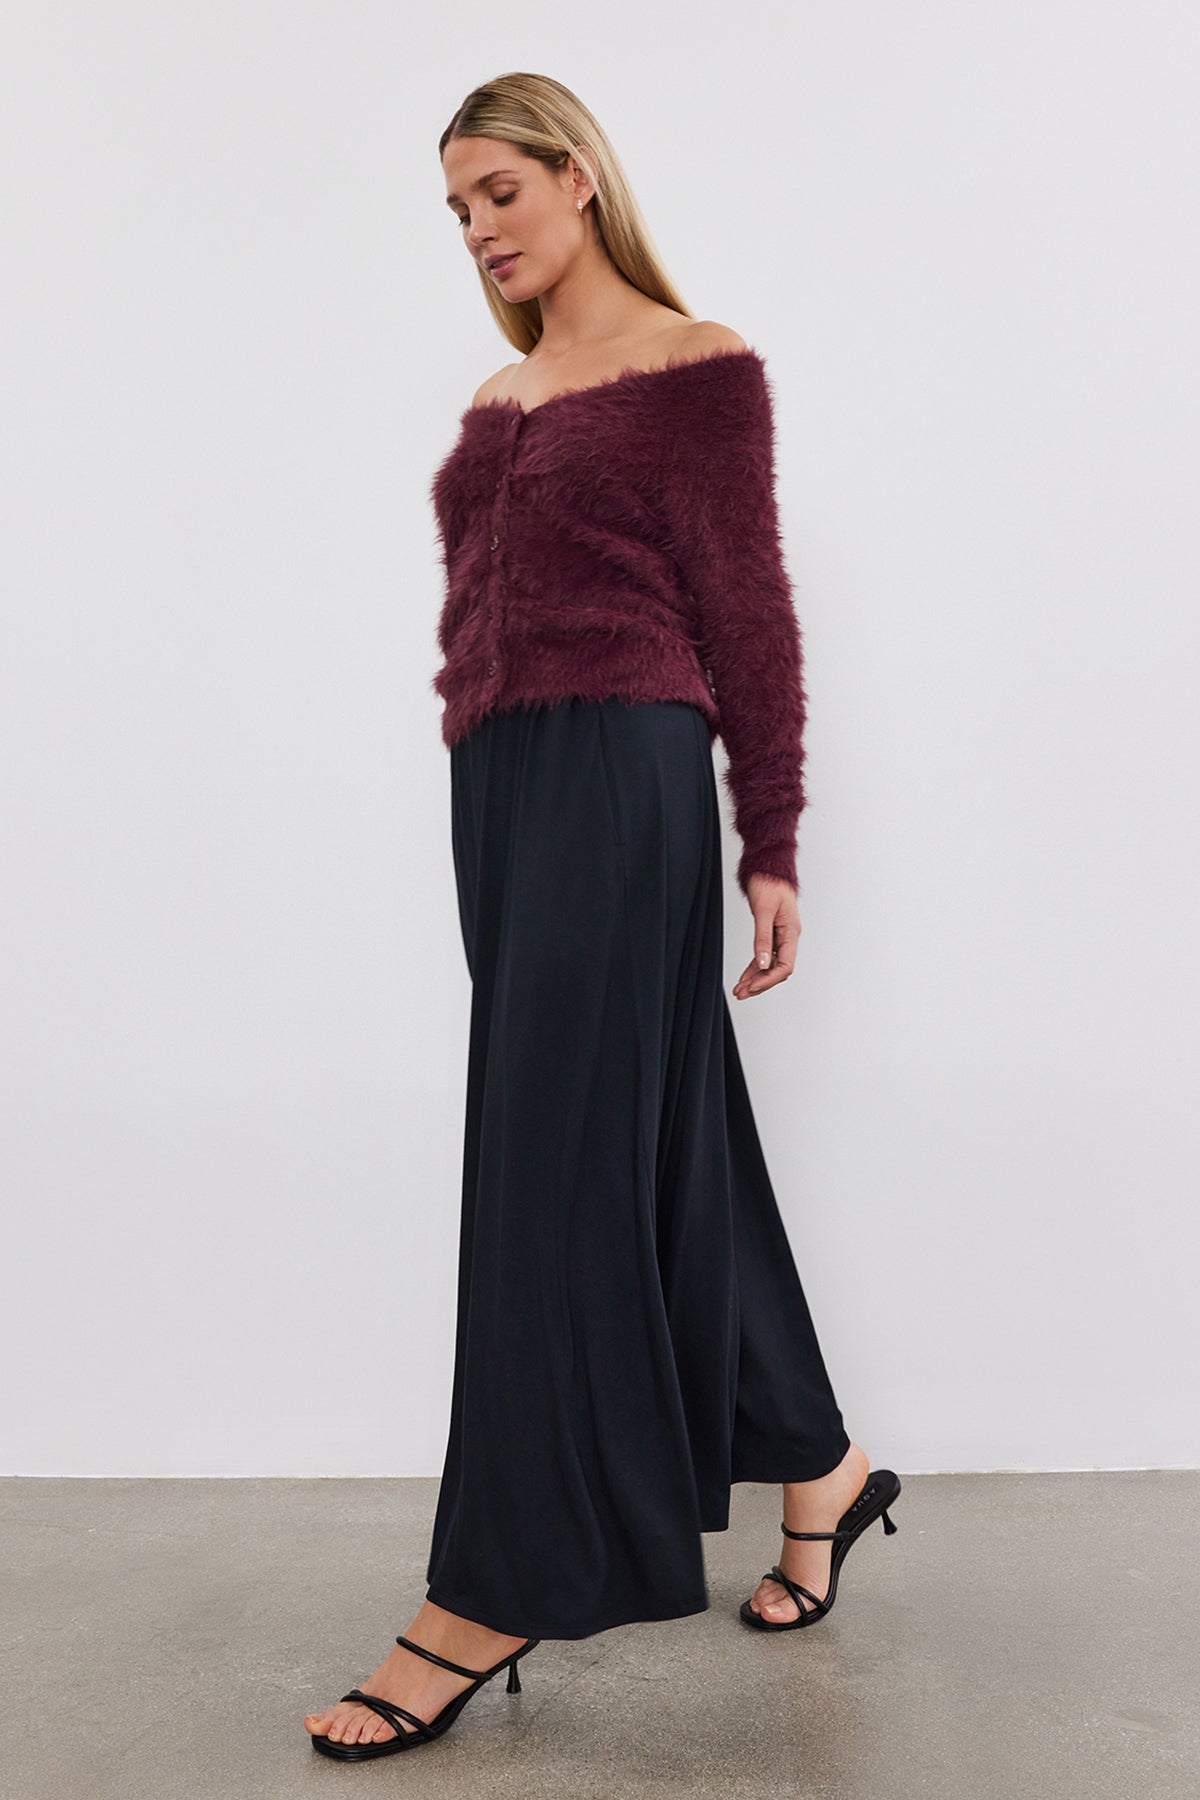   The model is wearing a burgundy MALAYA MAXI SKIRT by Velvet by Graham & Spencer and black wide leg pants made from soft jersey knit fabric. 